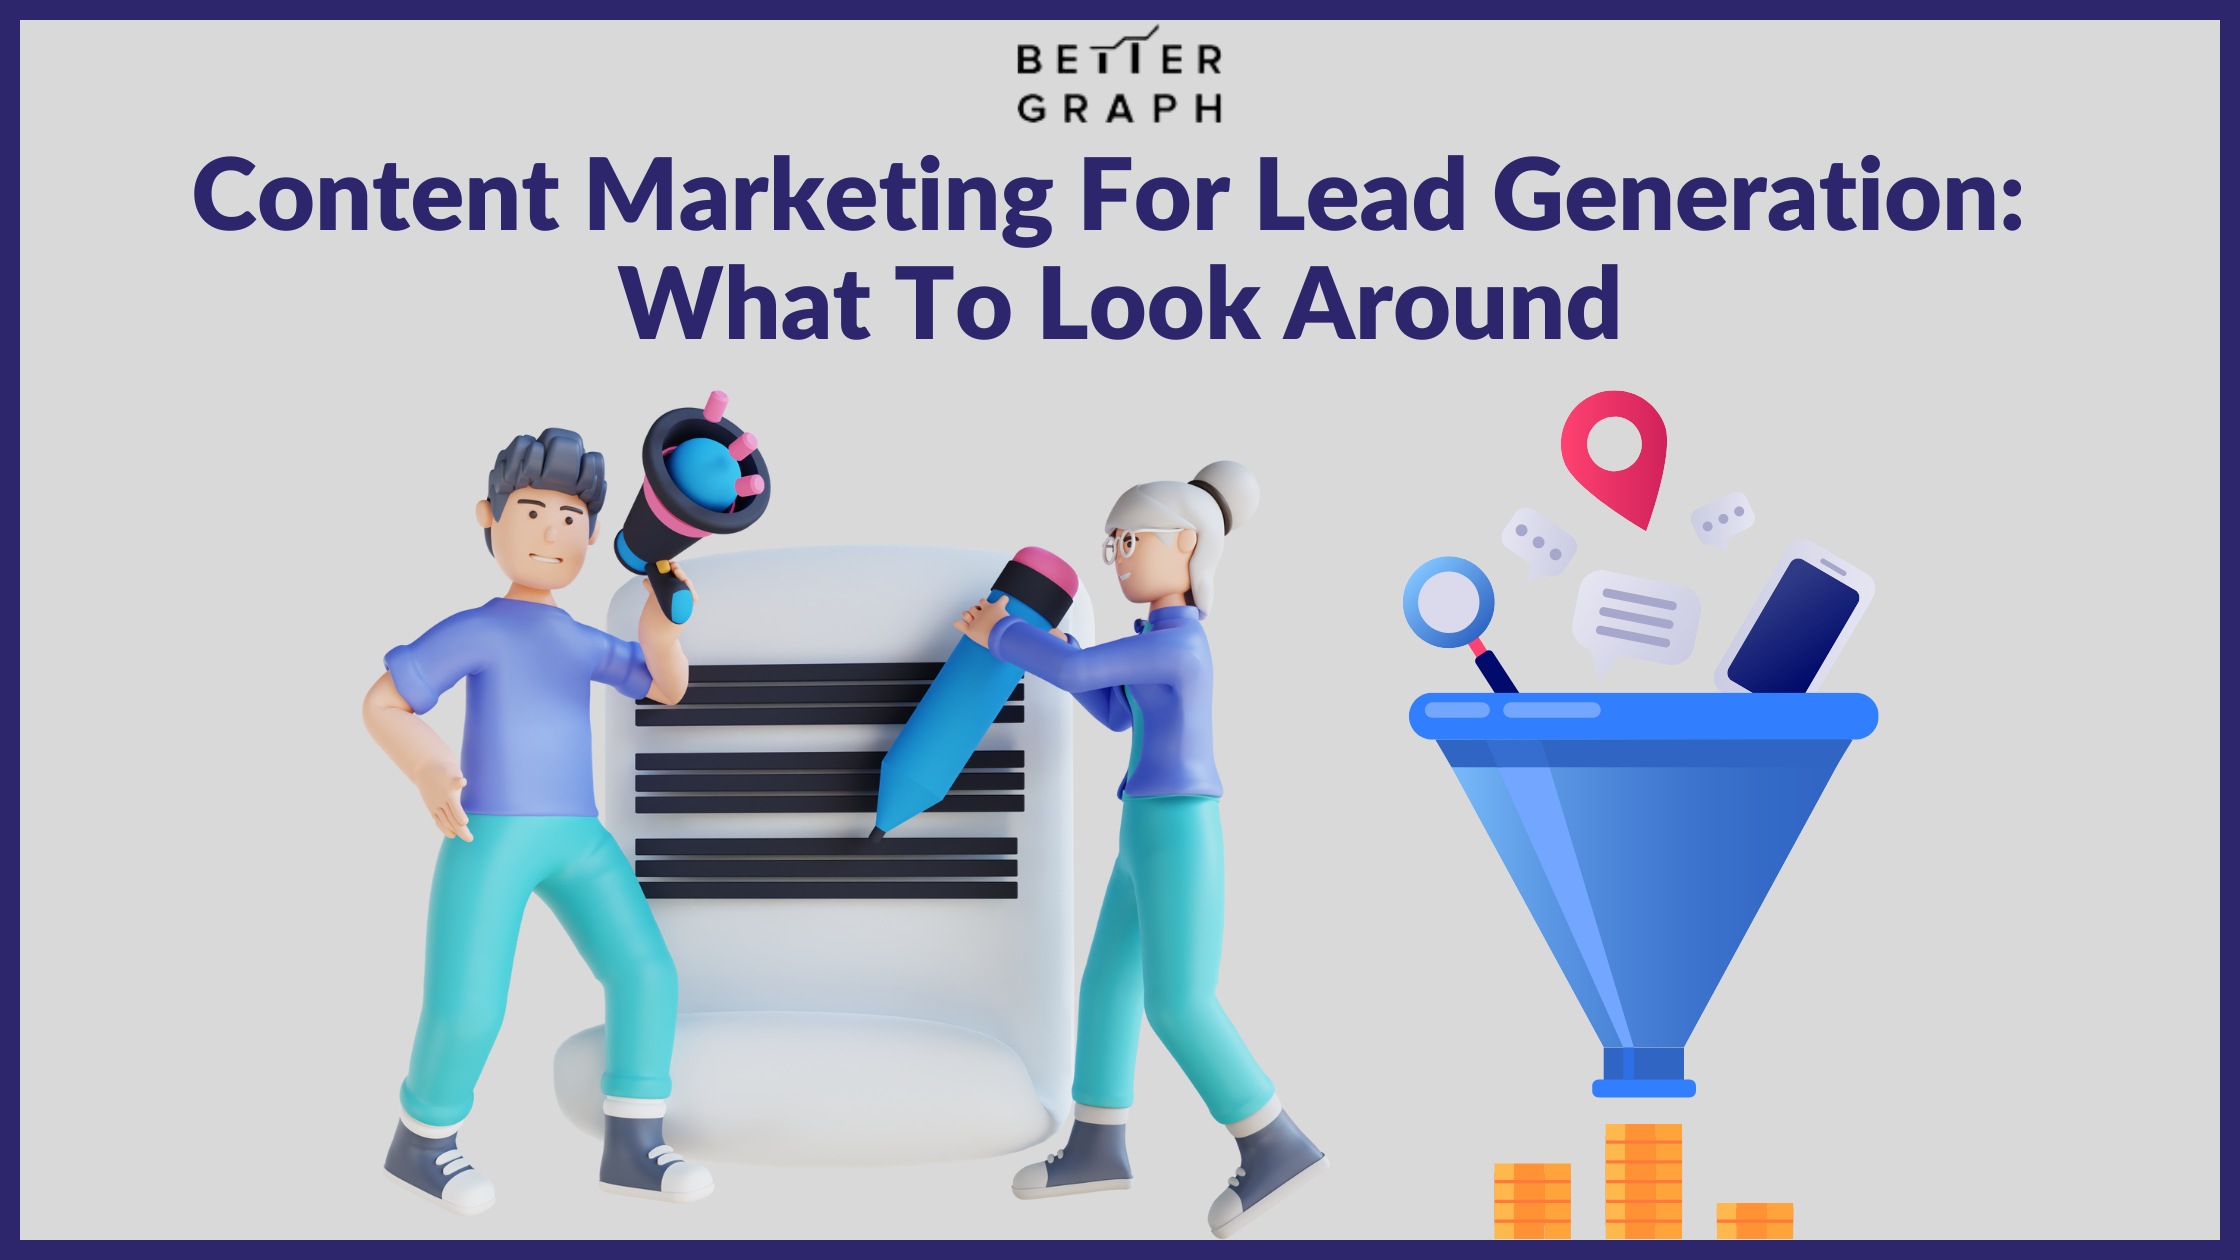 Content Marketing For Lead Generation What To Look Around (1).png  by BetterGraph